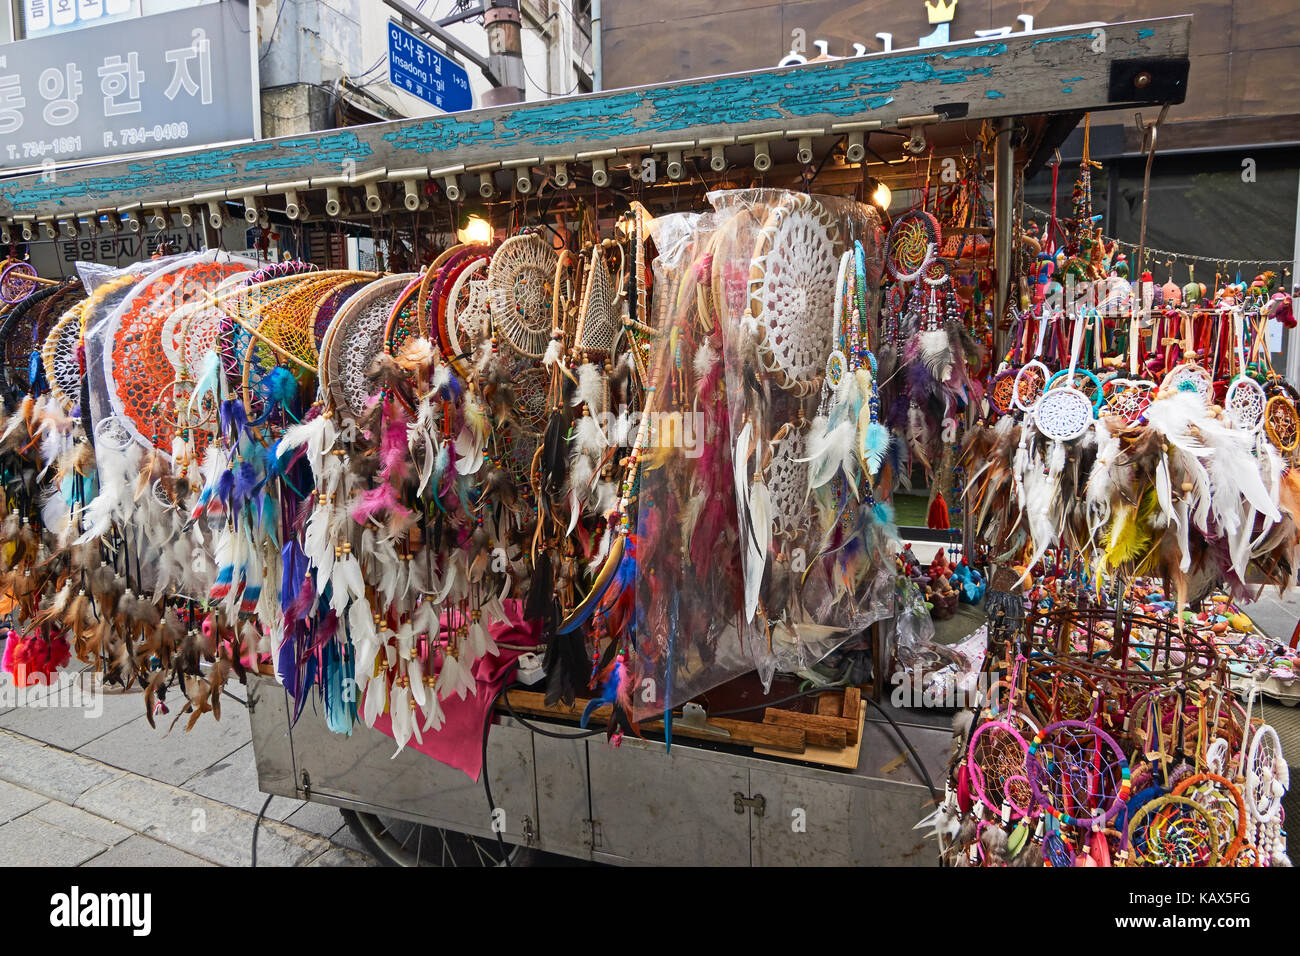 SEOUL, SOUTH KOREA - AUGUST 12, 2017: Dreamcatchers on sale at the Insadong street - a popular shopping area Stock Photo